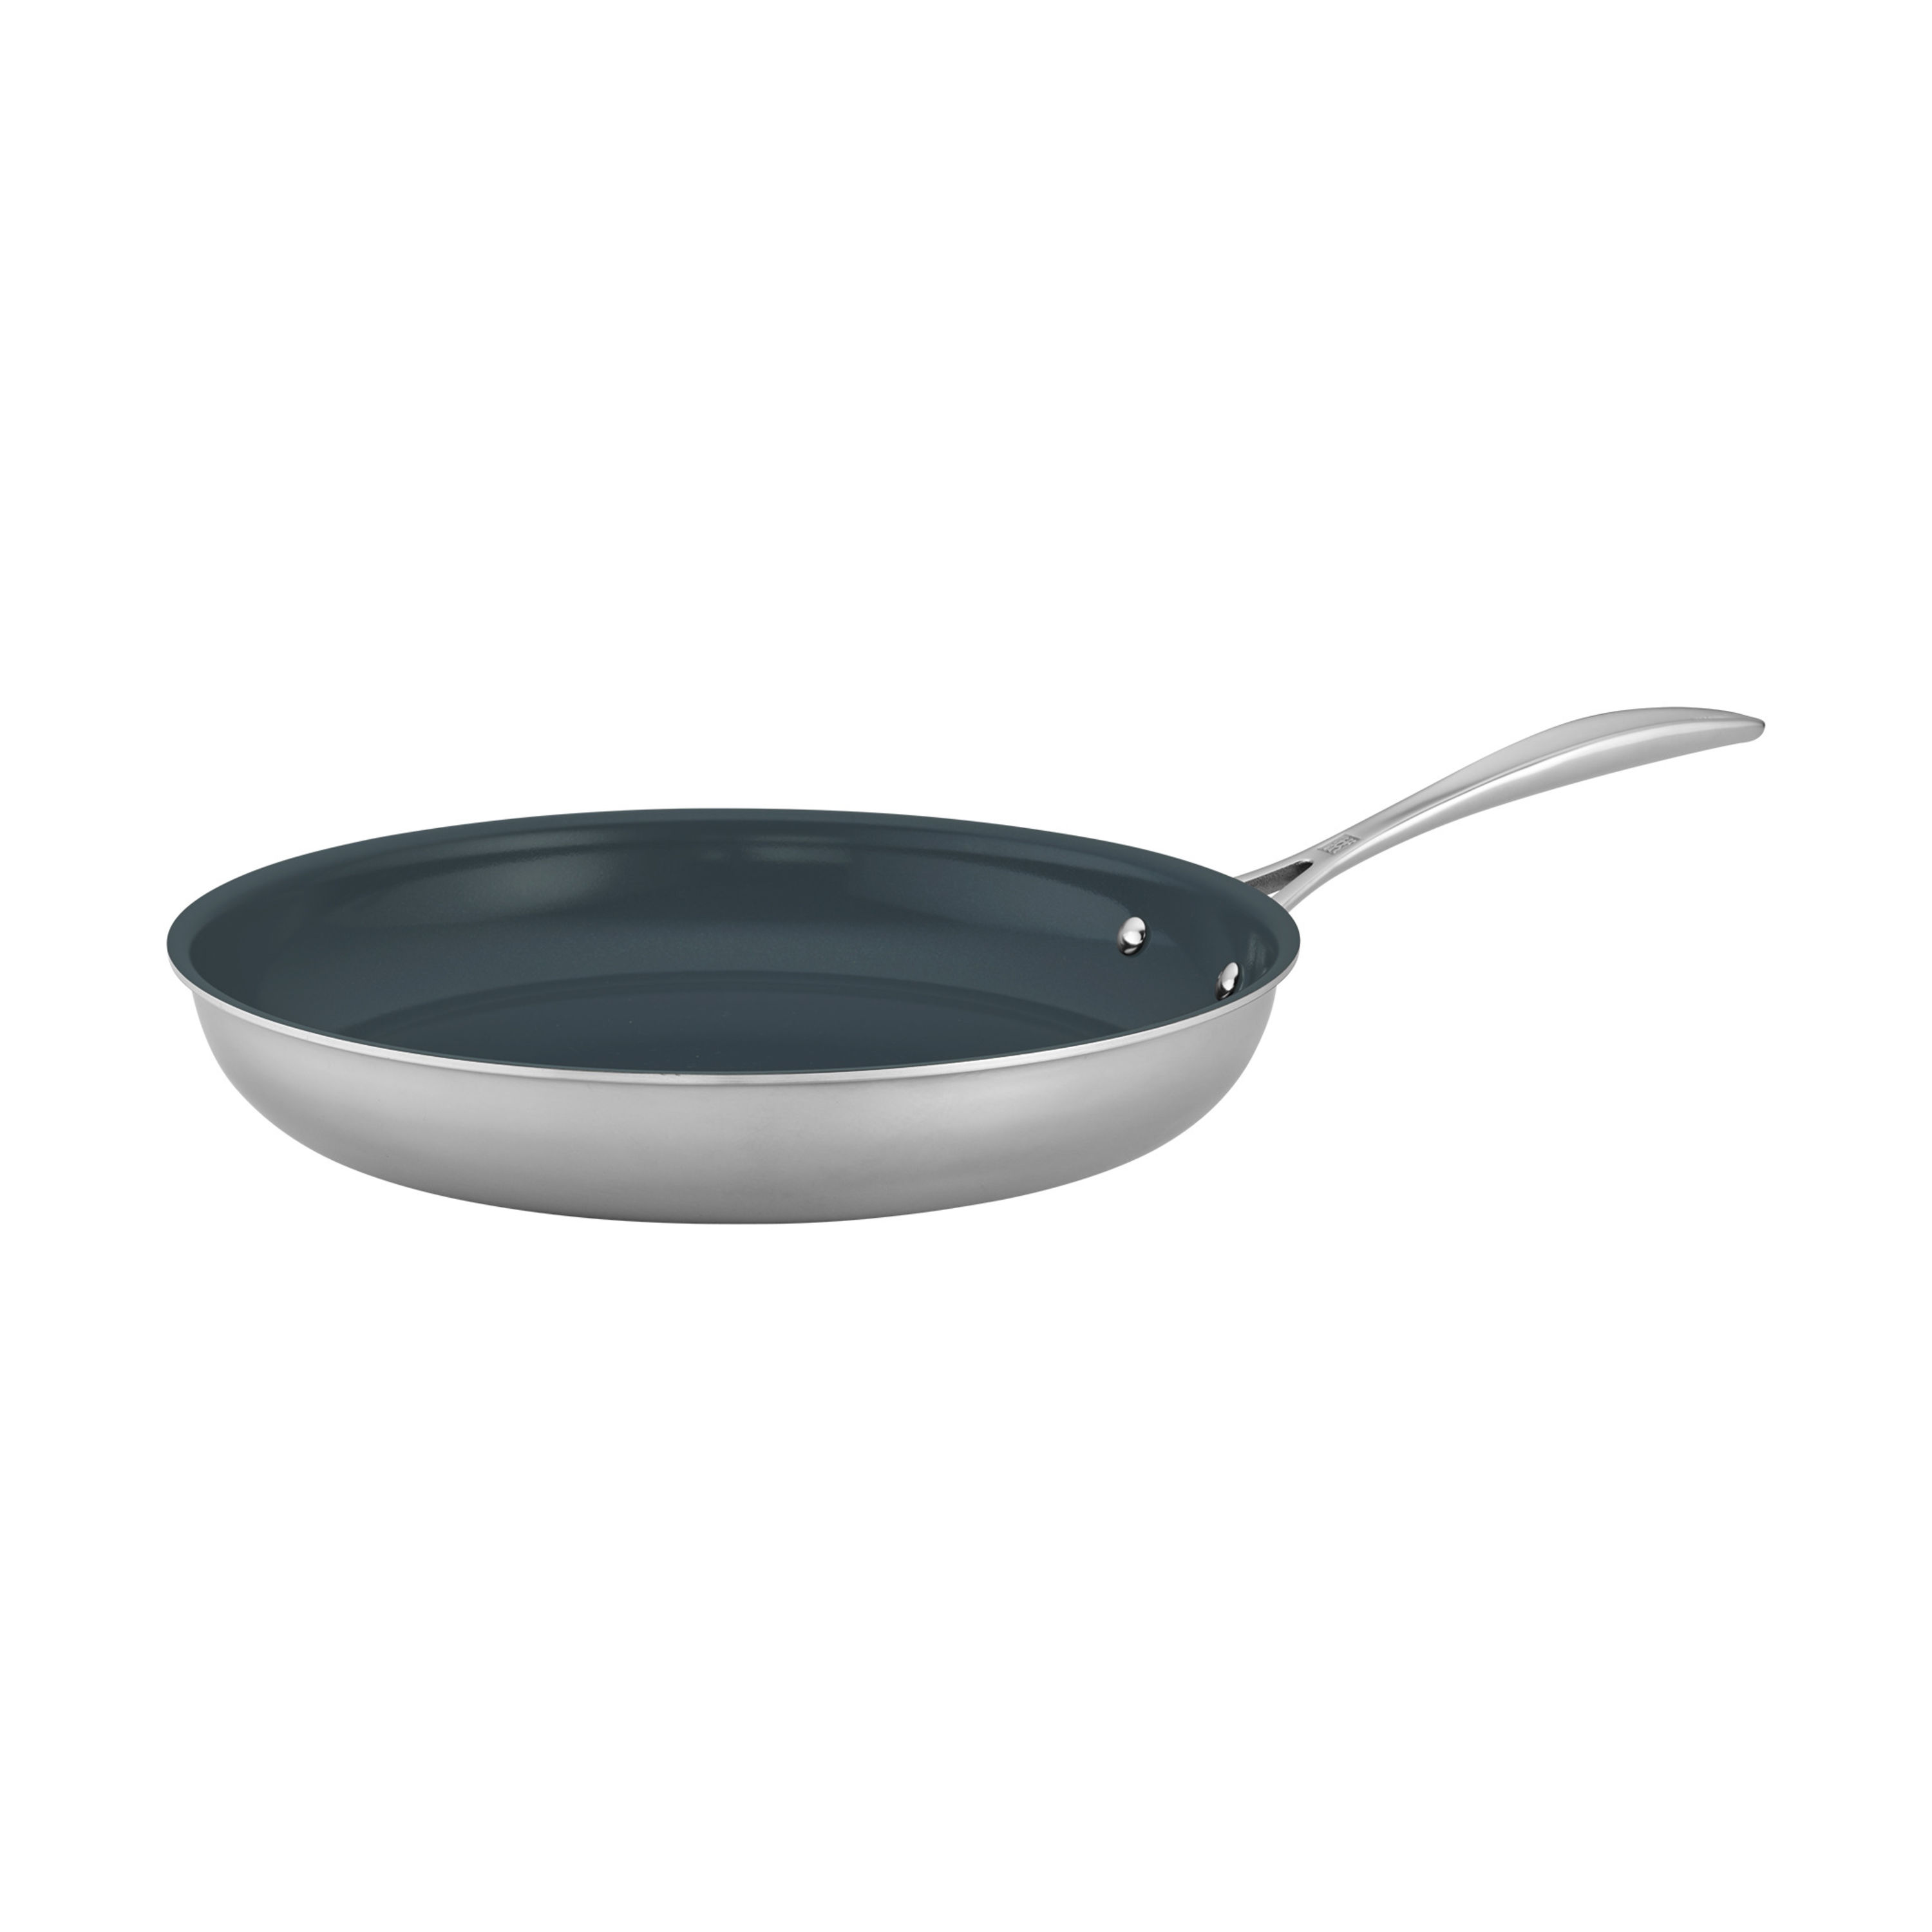 All Clad Non-Stick Frying Pan Black Steel Handle Fry Pan Skillet 12 inch  30cm